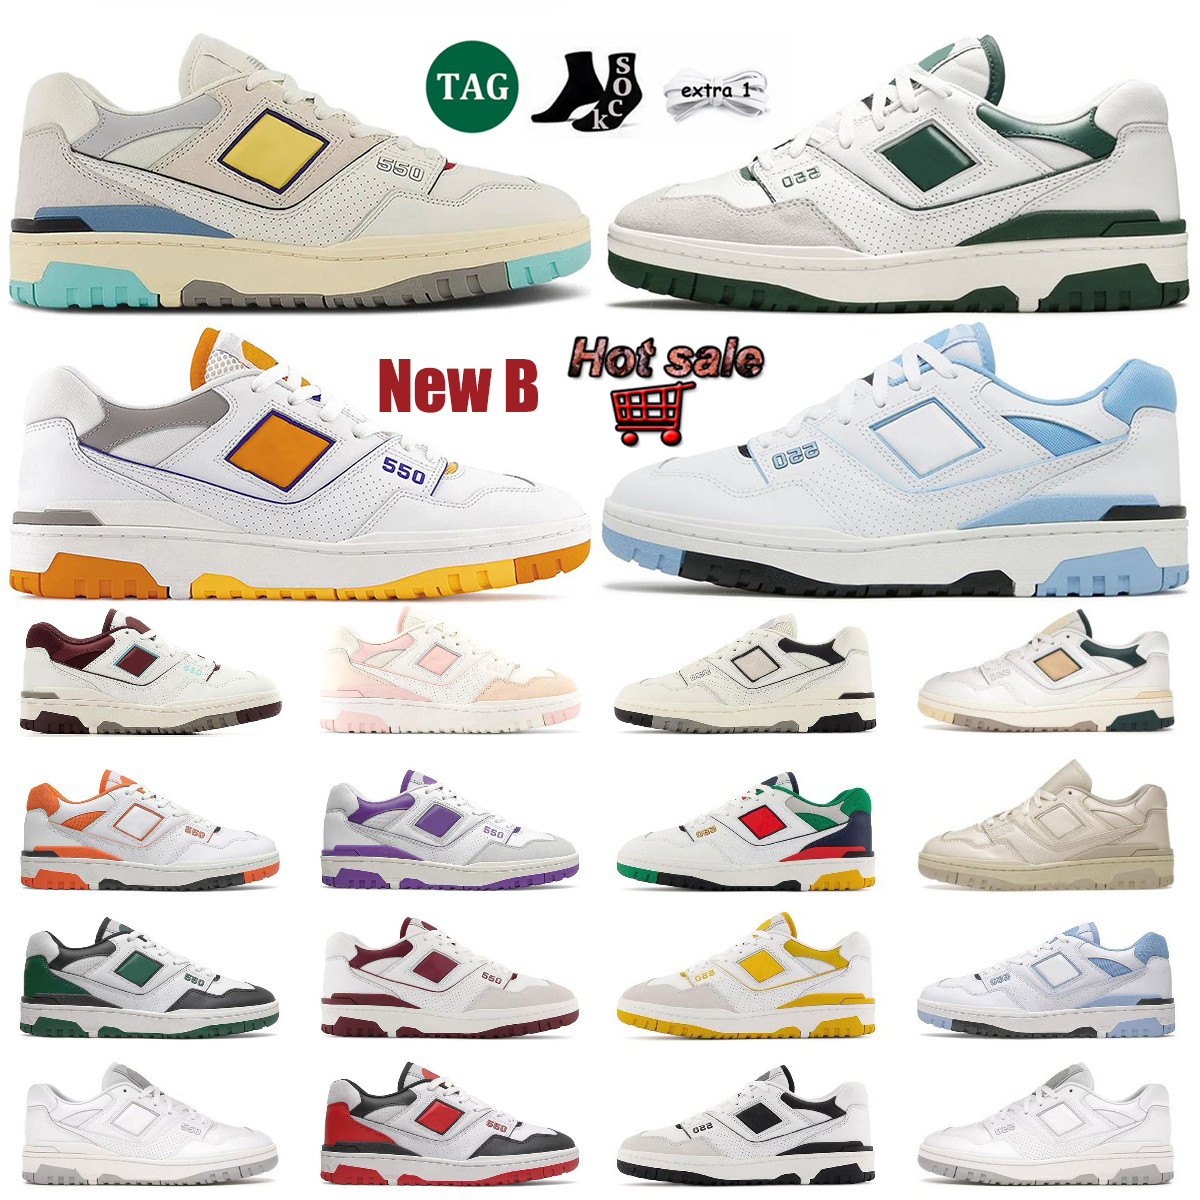 

Designer New 550 Shoes Casual running Shoes Men Women Sneakers Res White Green Black Grey UNC bb 550s Amongst AURALEE Varsity Gold Shadow Mens nb Womens Sports Outdoor, (33) 36-40